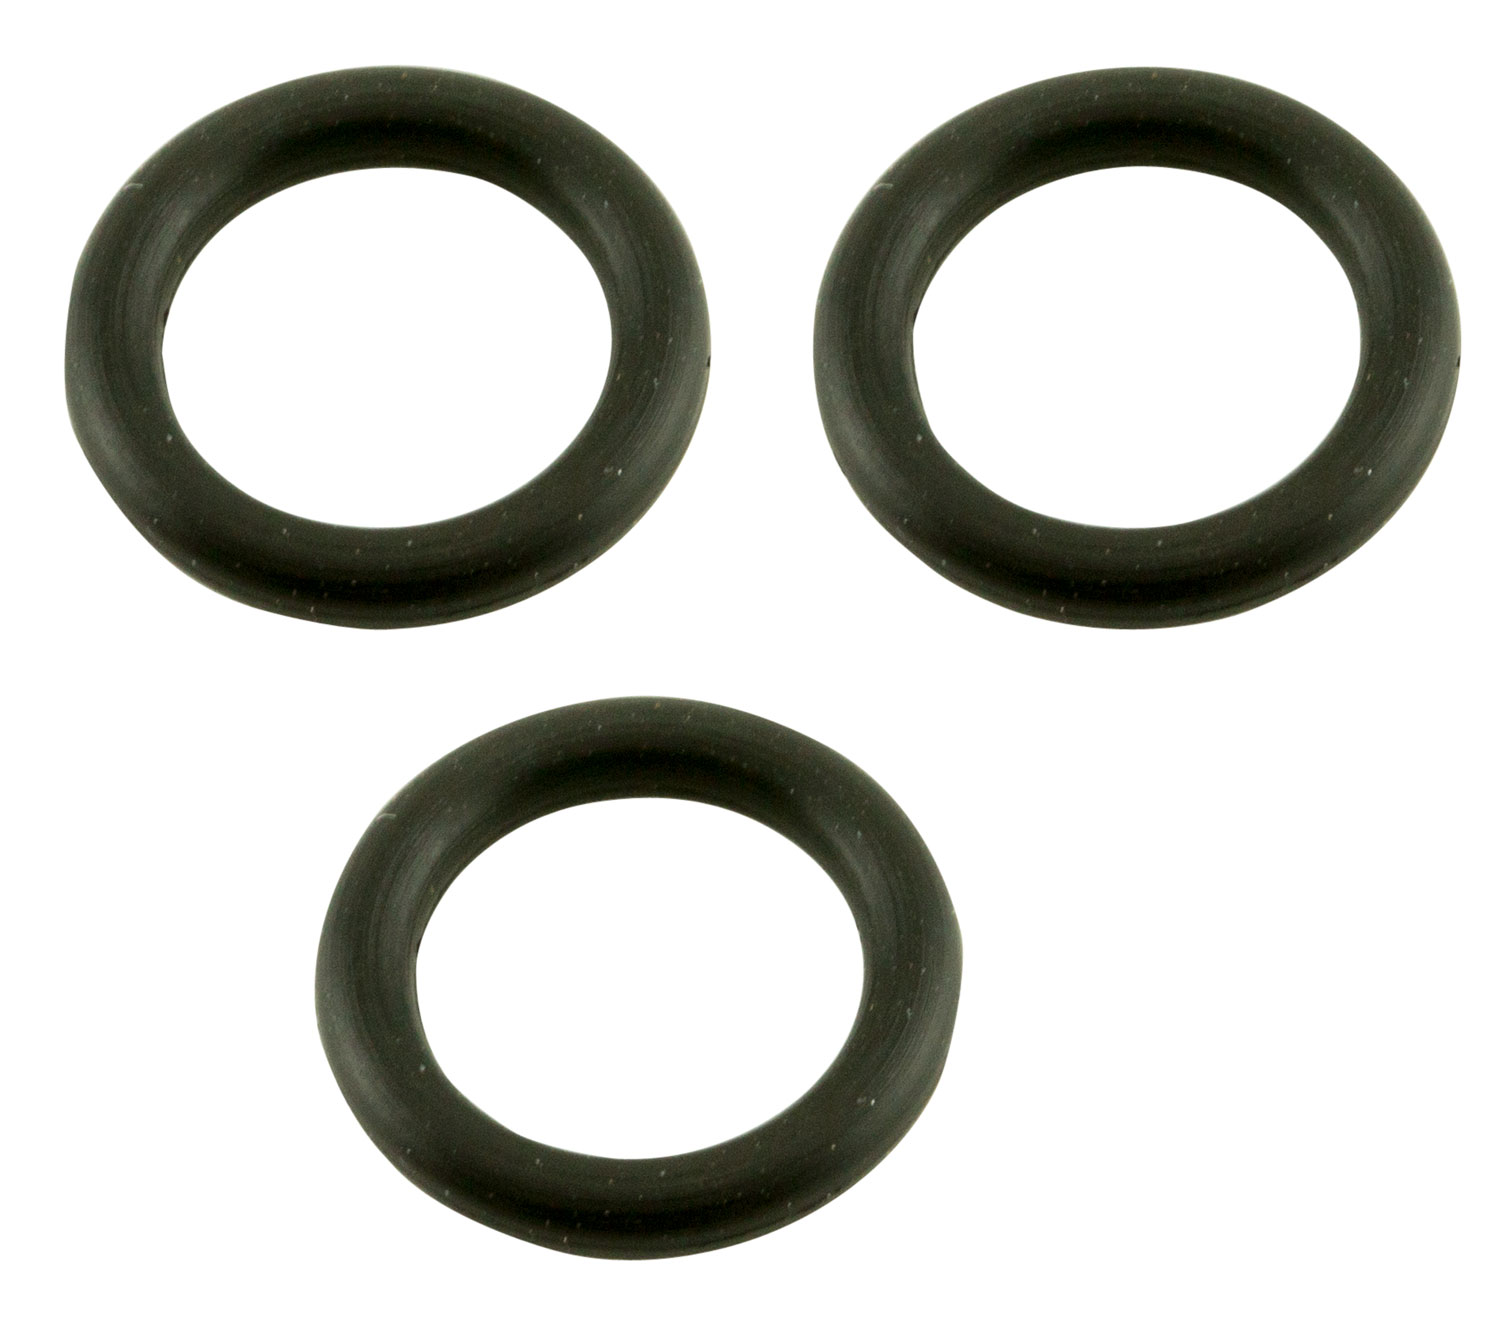 T/C Accessories 3005294 Strike O-Ring T/C Muzzleloaders Black 3 Pack